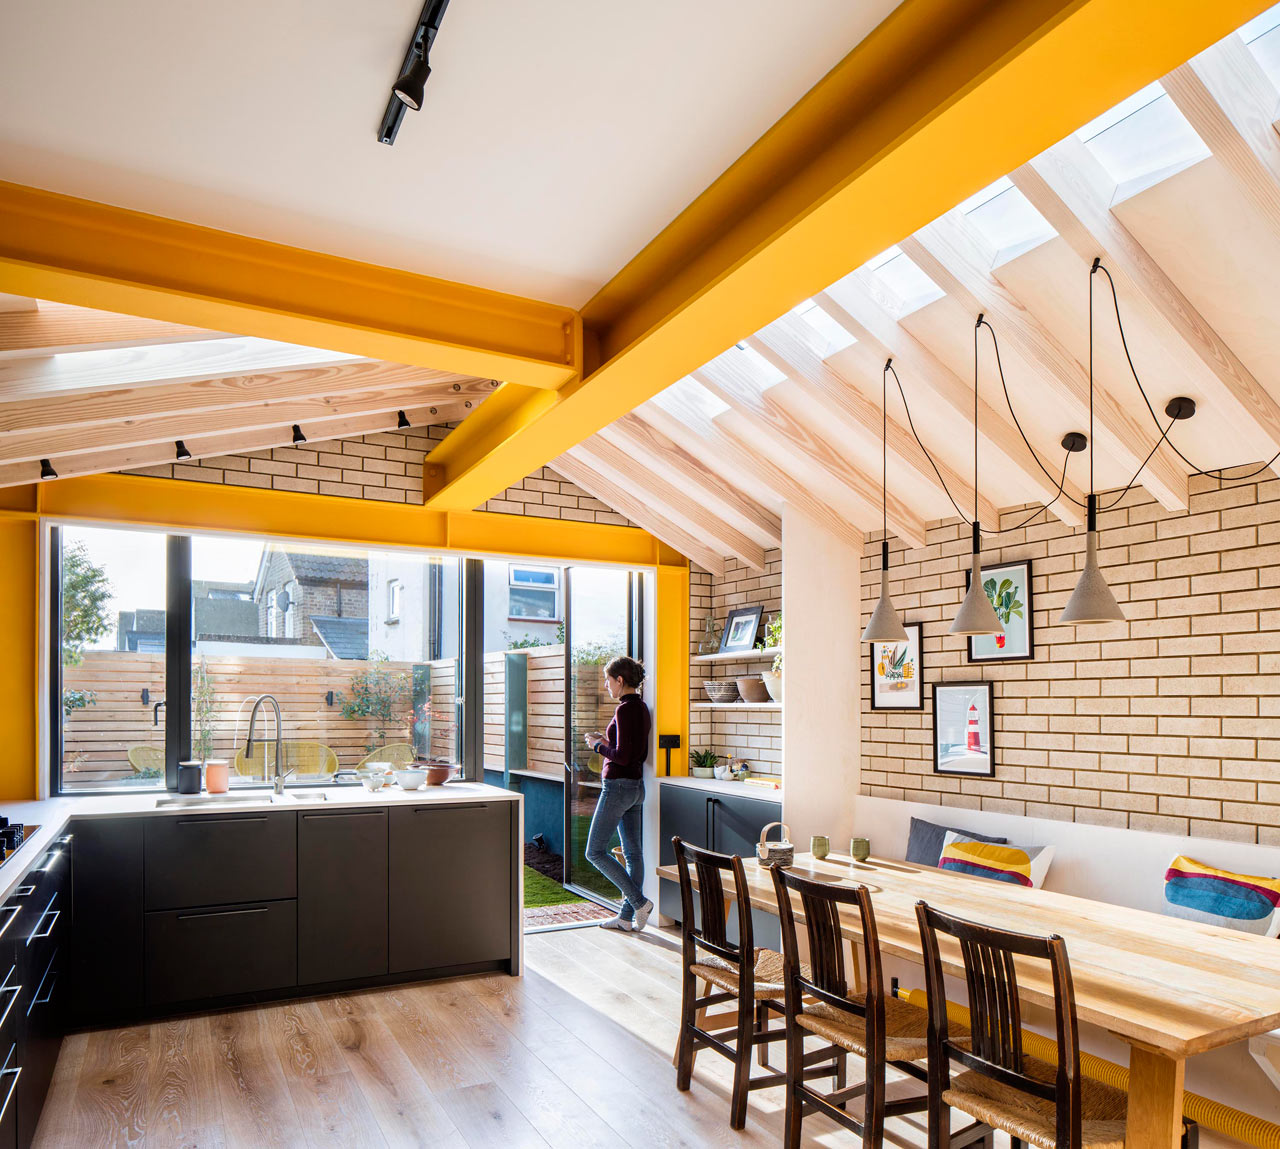 London’s Yellow Steel House Is a Colorful Extension to a Terraced House